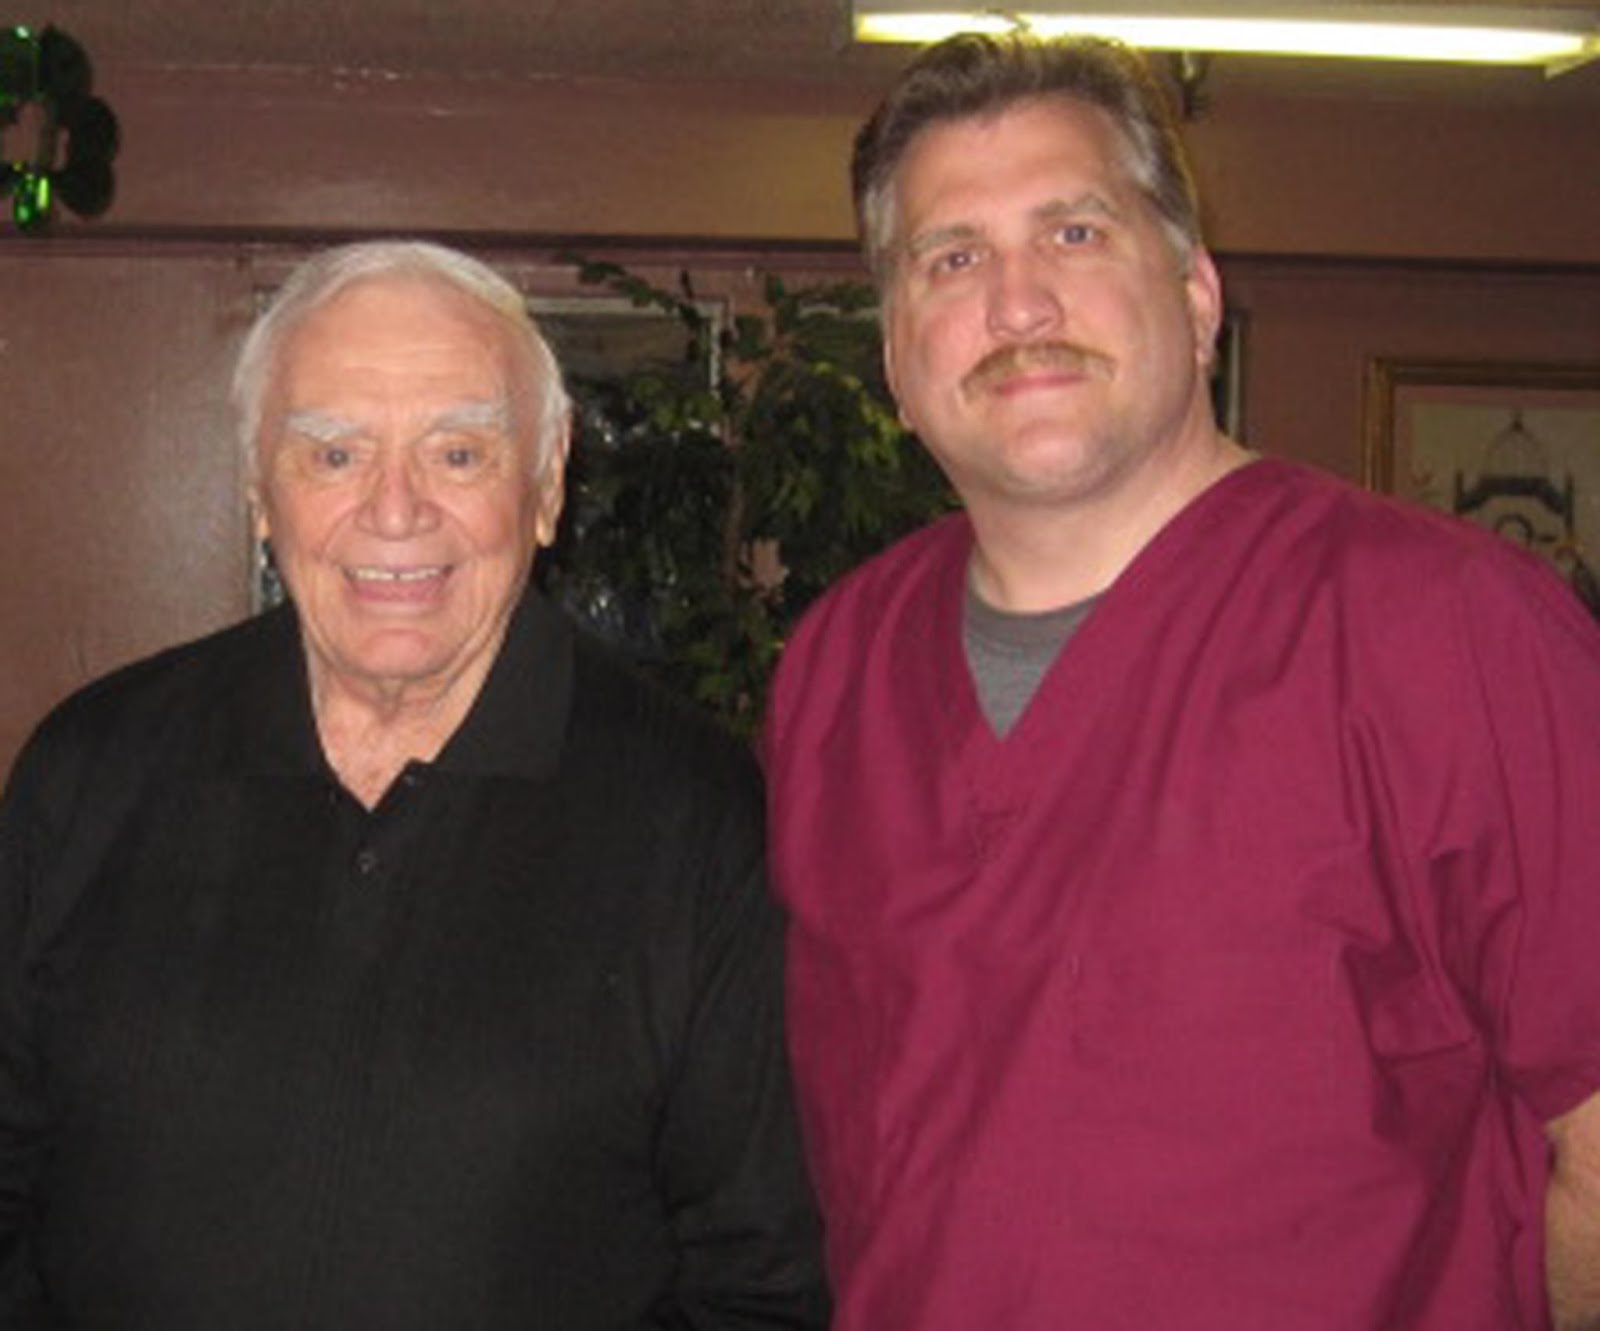 With Ernest Borgnine....one of my all time favorite actors!